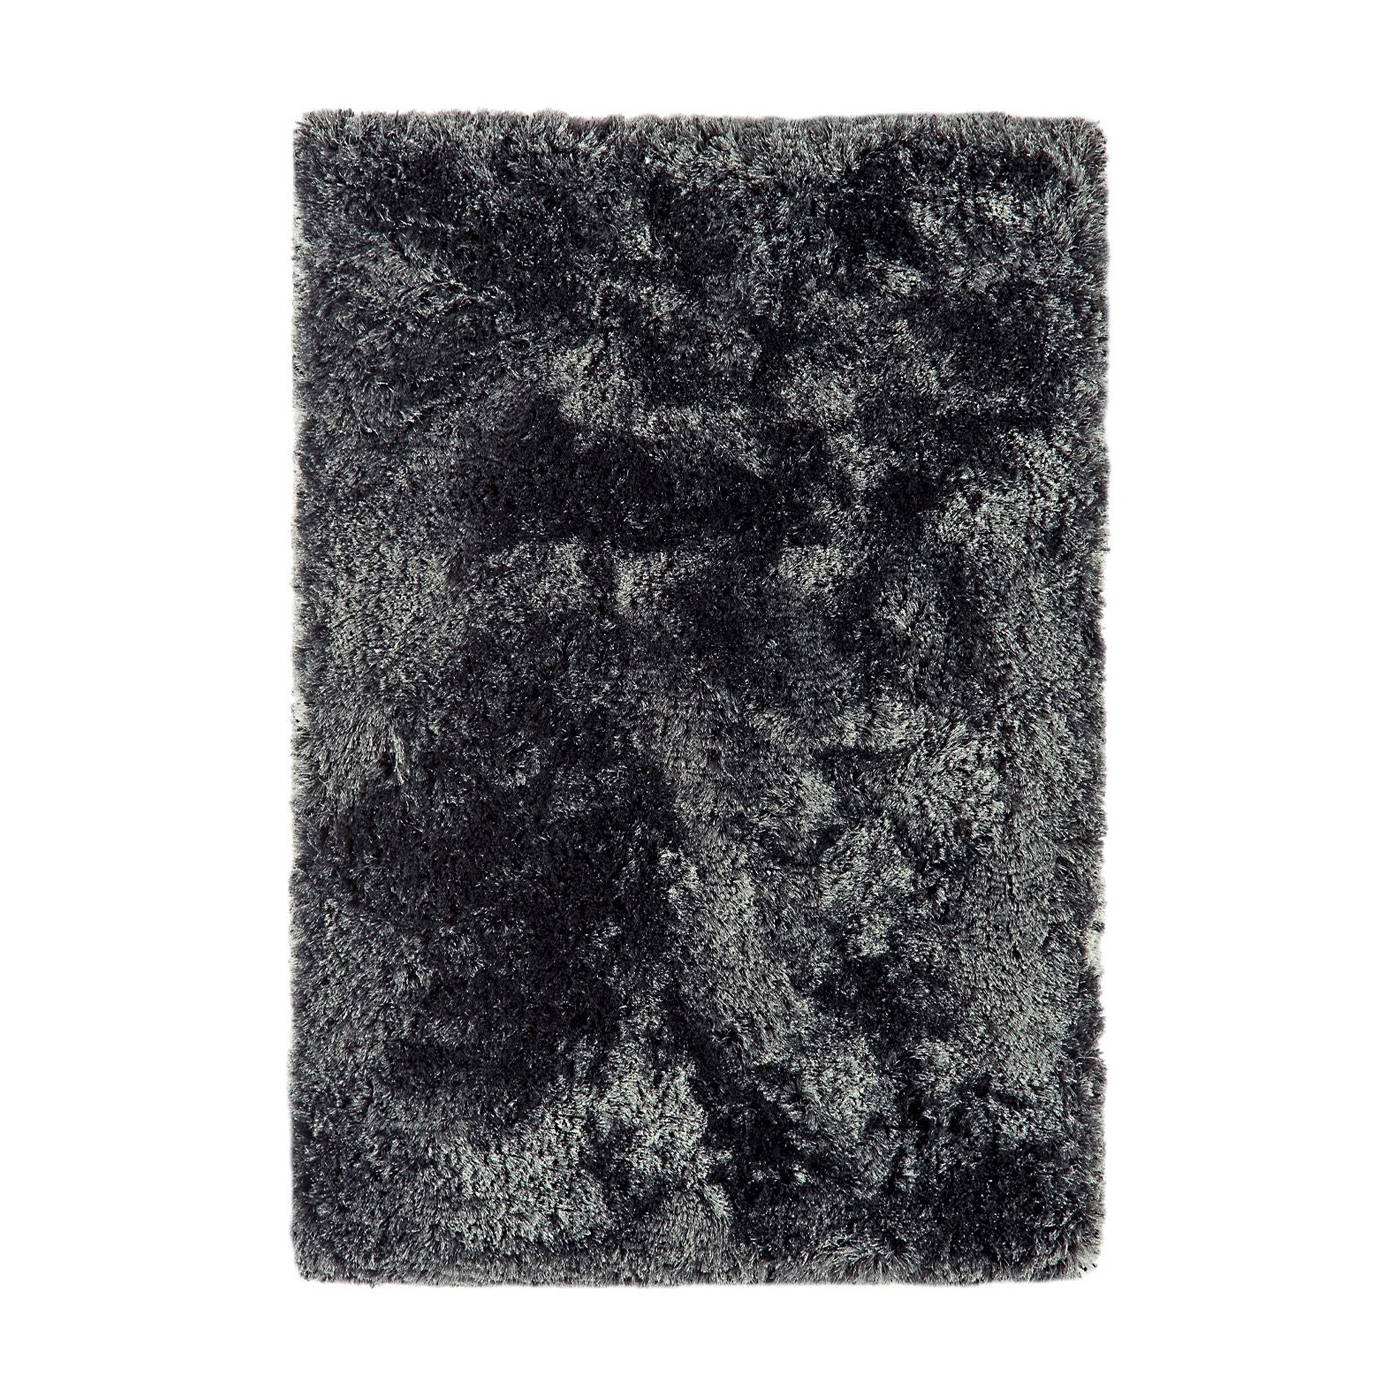 Plush Floor Rugs Now Available Online At www.bfhome.co.uk